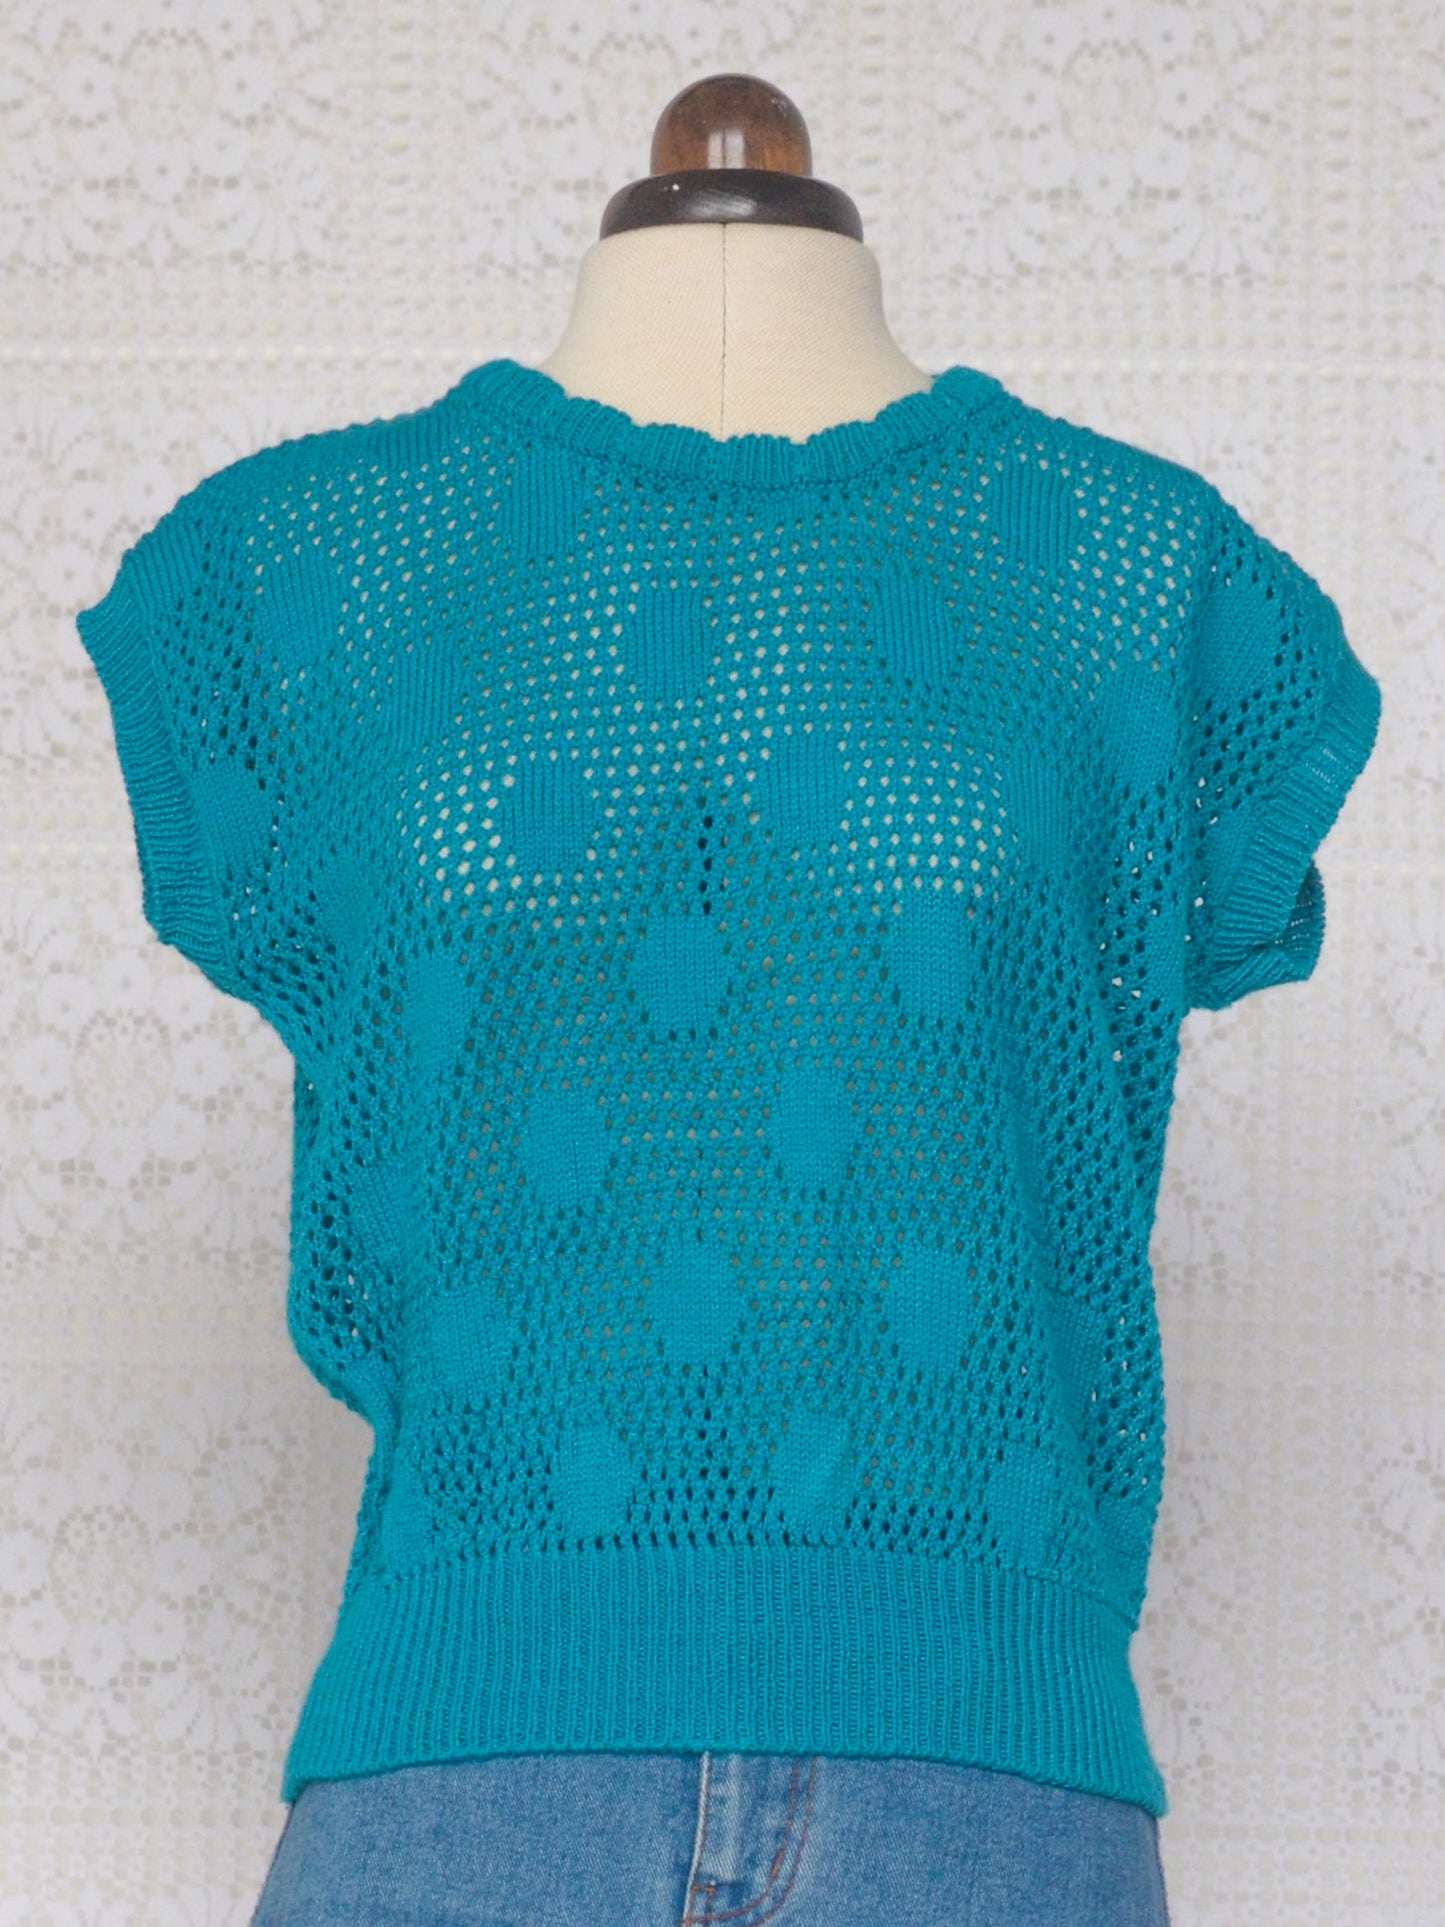 1980s style teal knitted sleeveless jumper with polkadot pattern